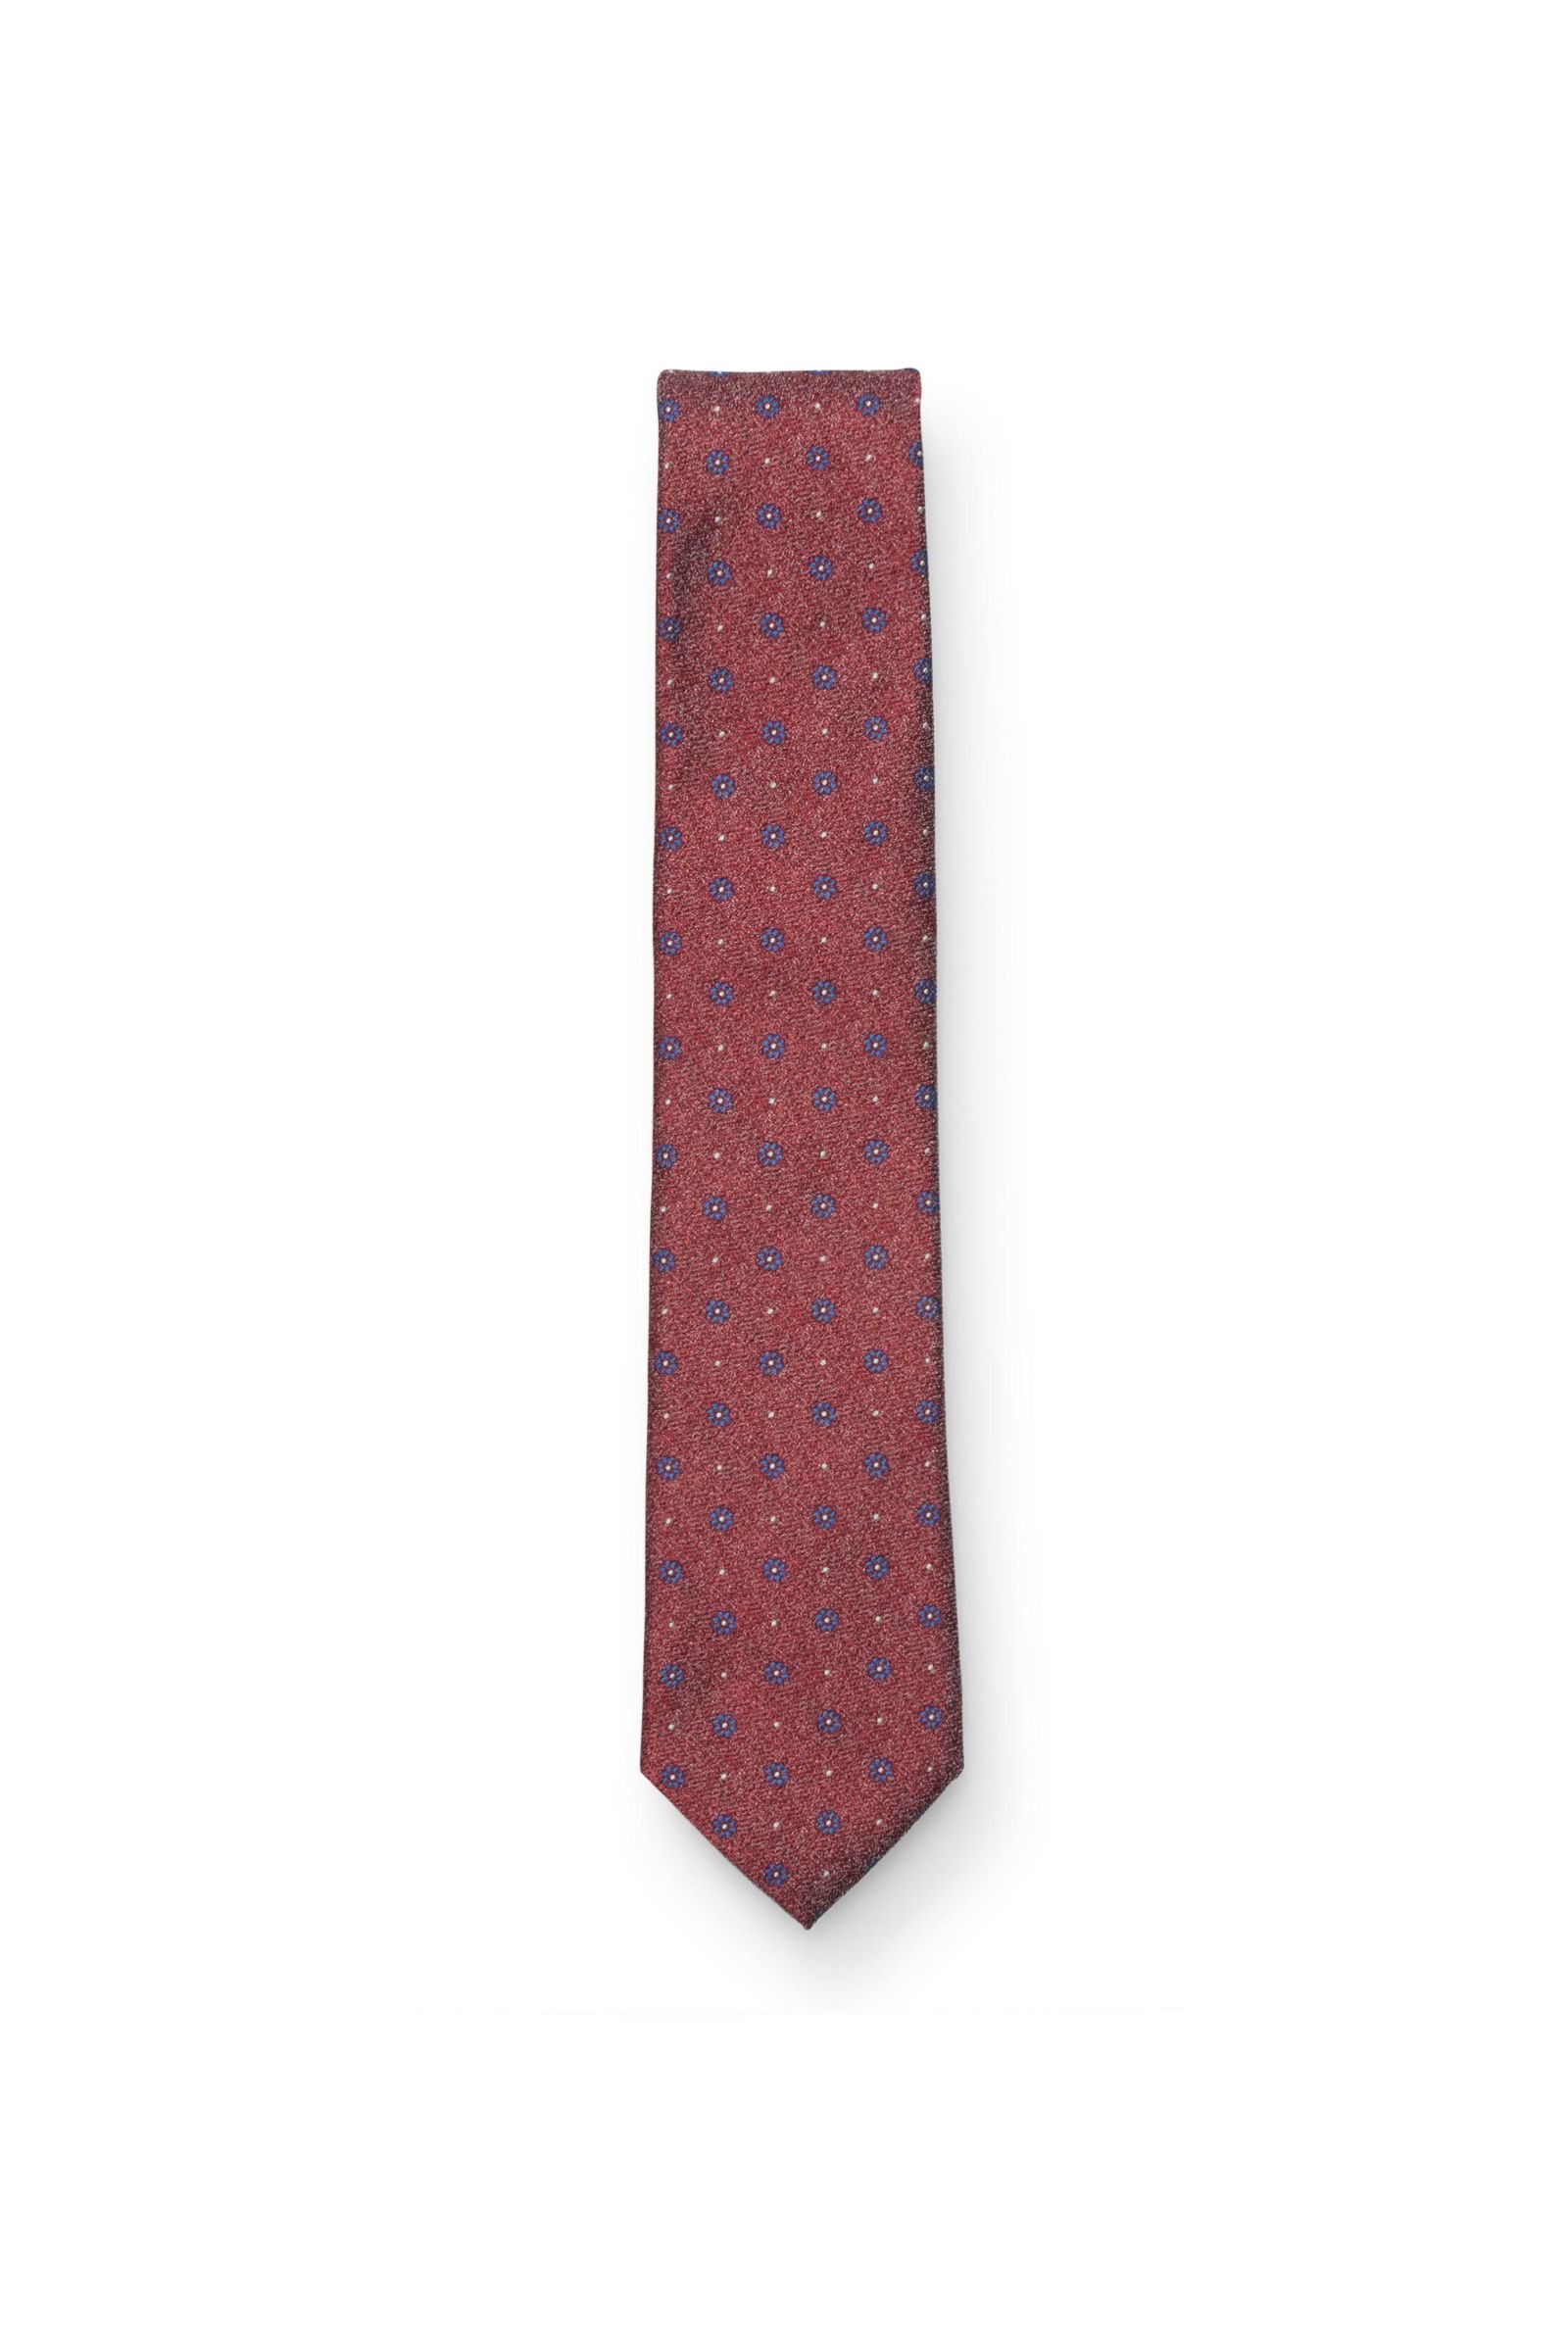 Silk tie red patterned